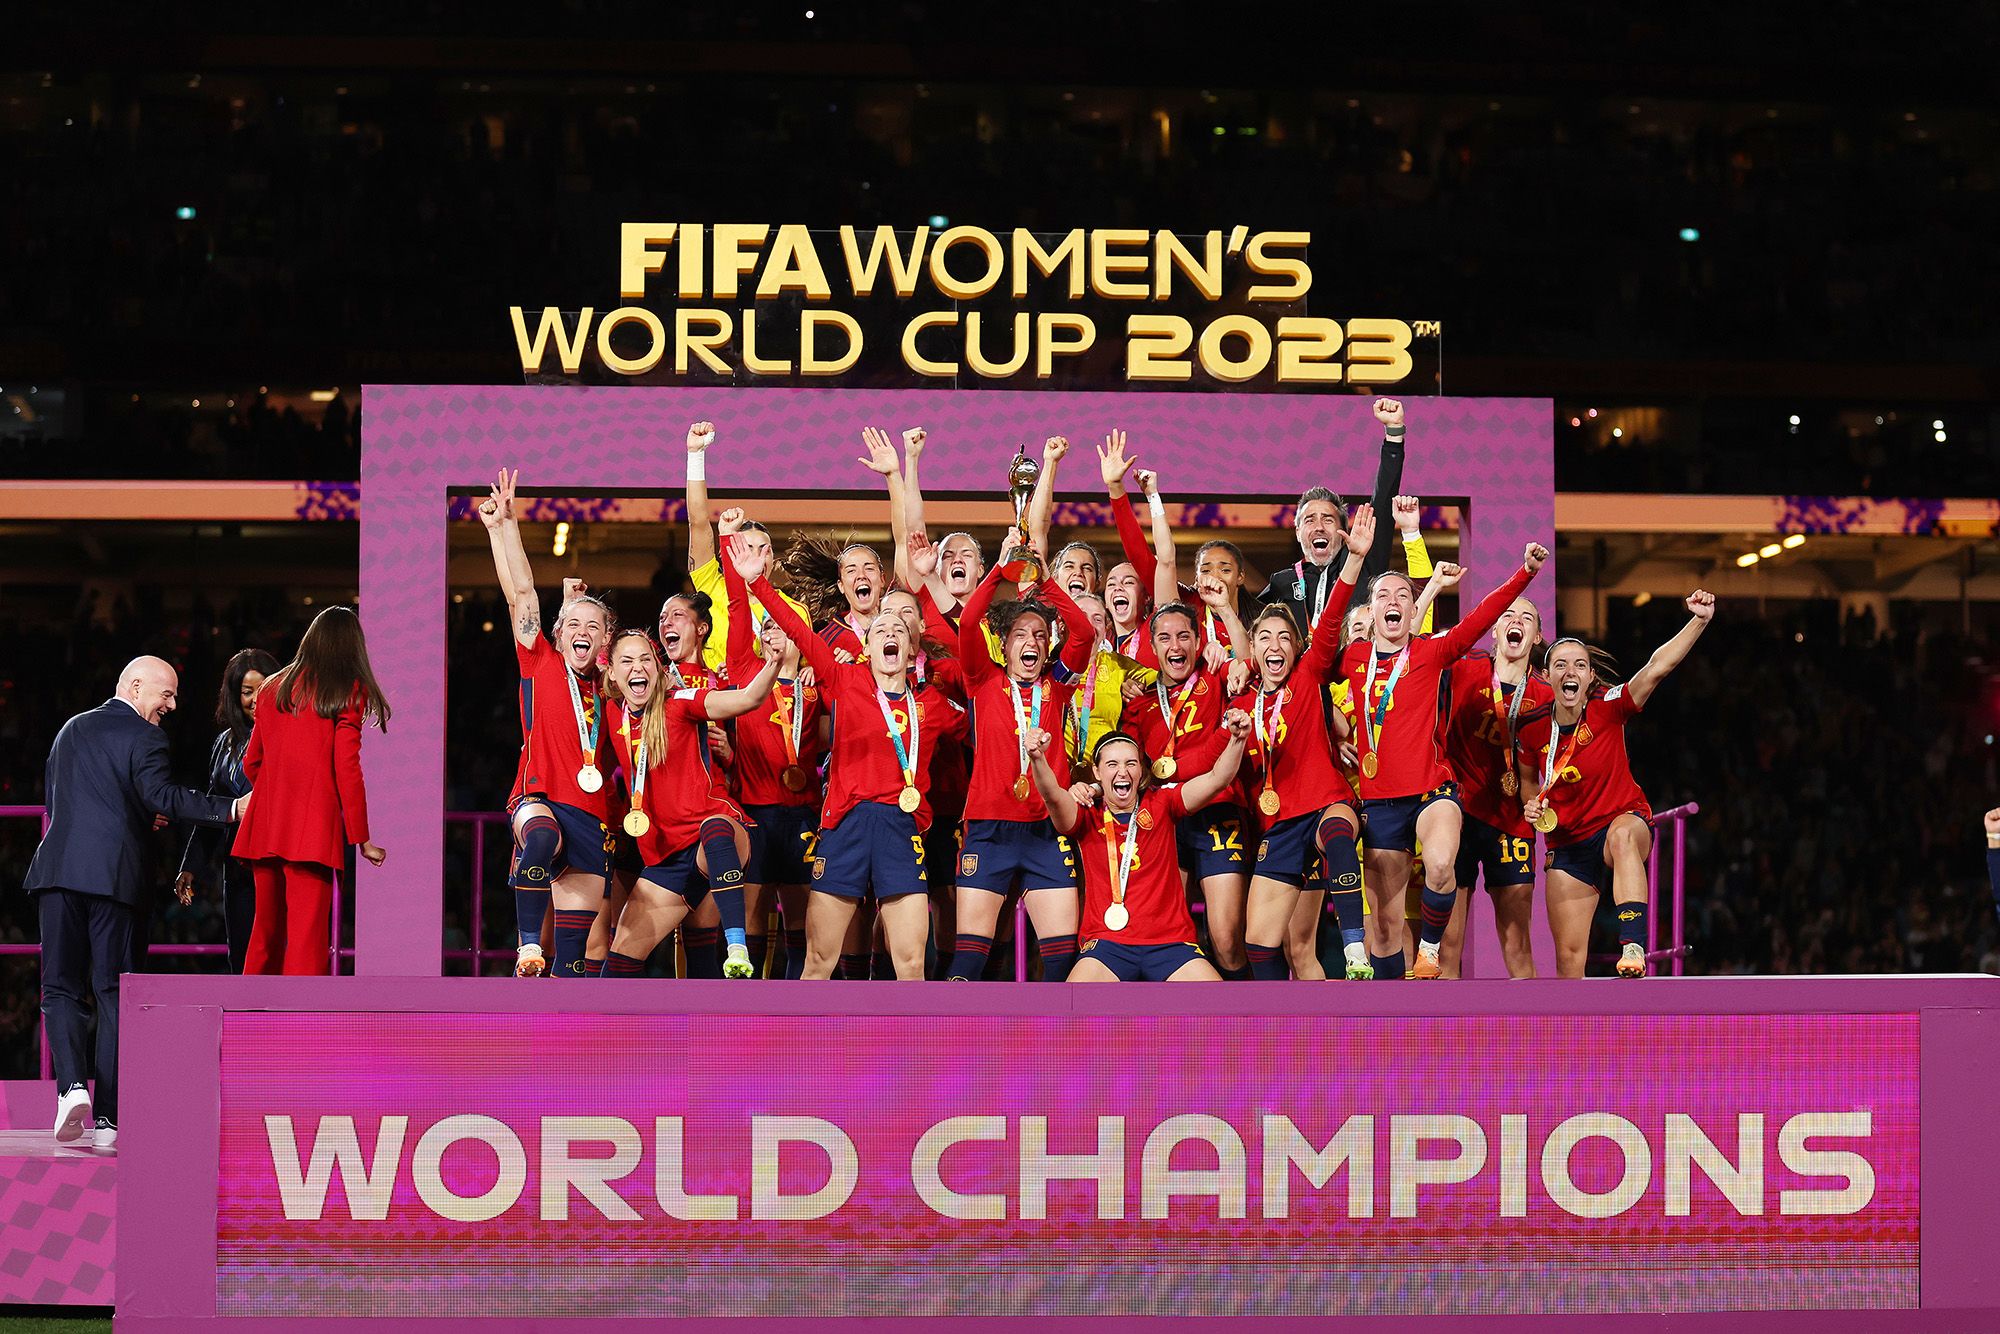 The 2023 Women's World Cup in numbers - SportsPro